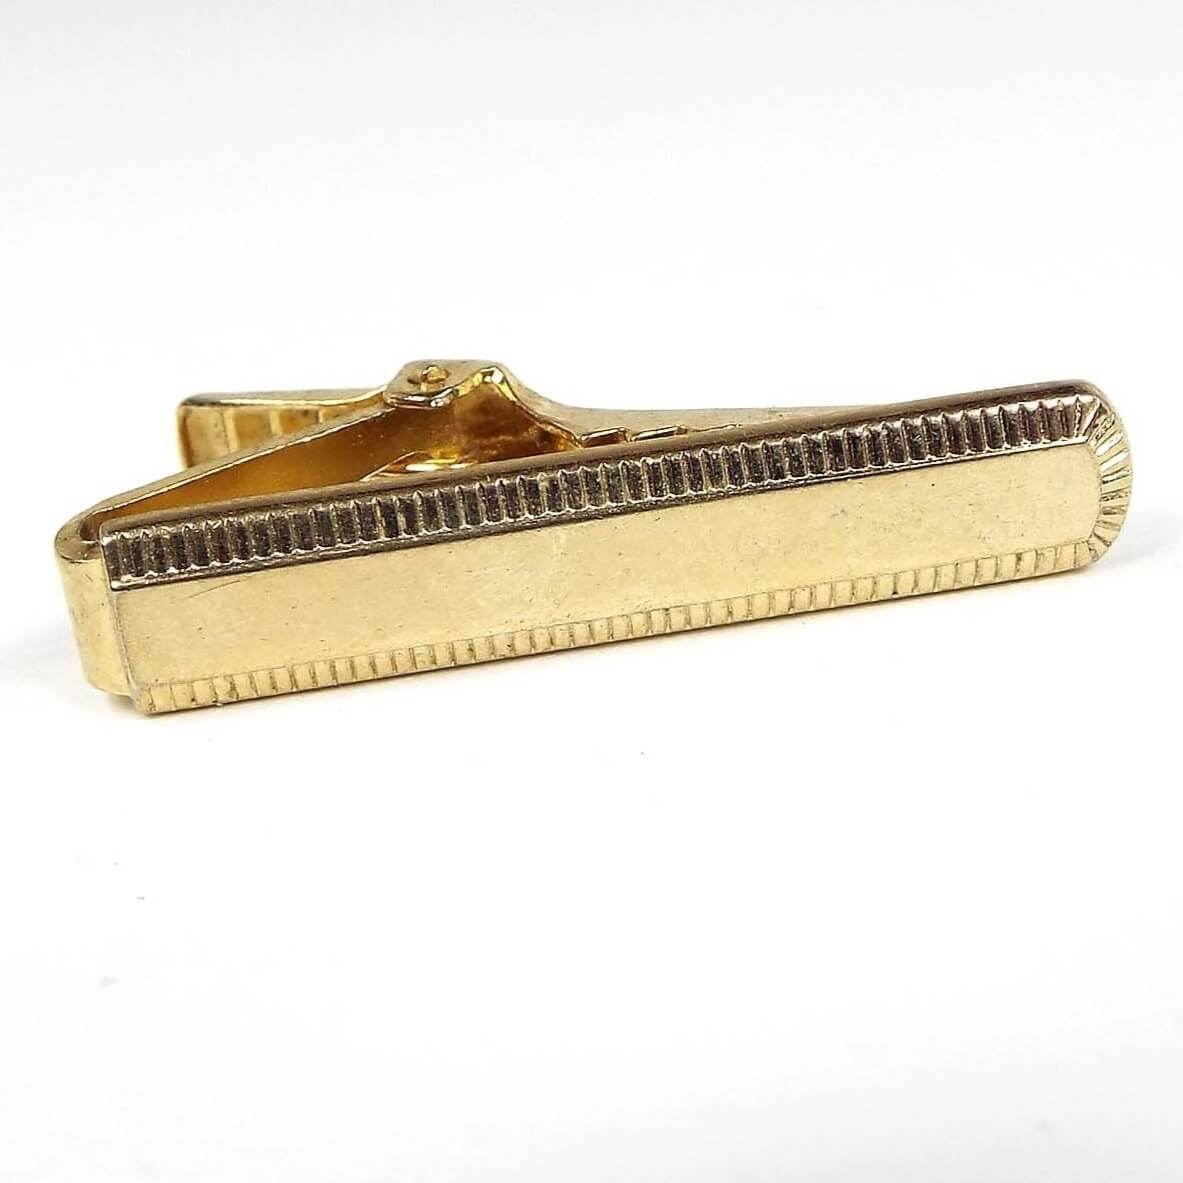 Front view of the Anson Mid Century vintage tie clip. The metal is gold tone in color. The end of the tie clip is rounded and there is a rectangle textured design around the edge of the tie clip.